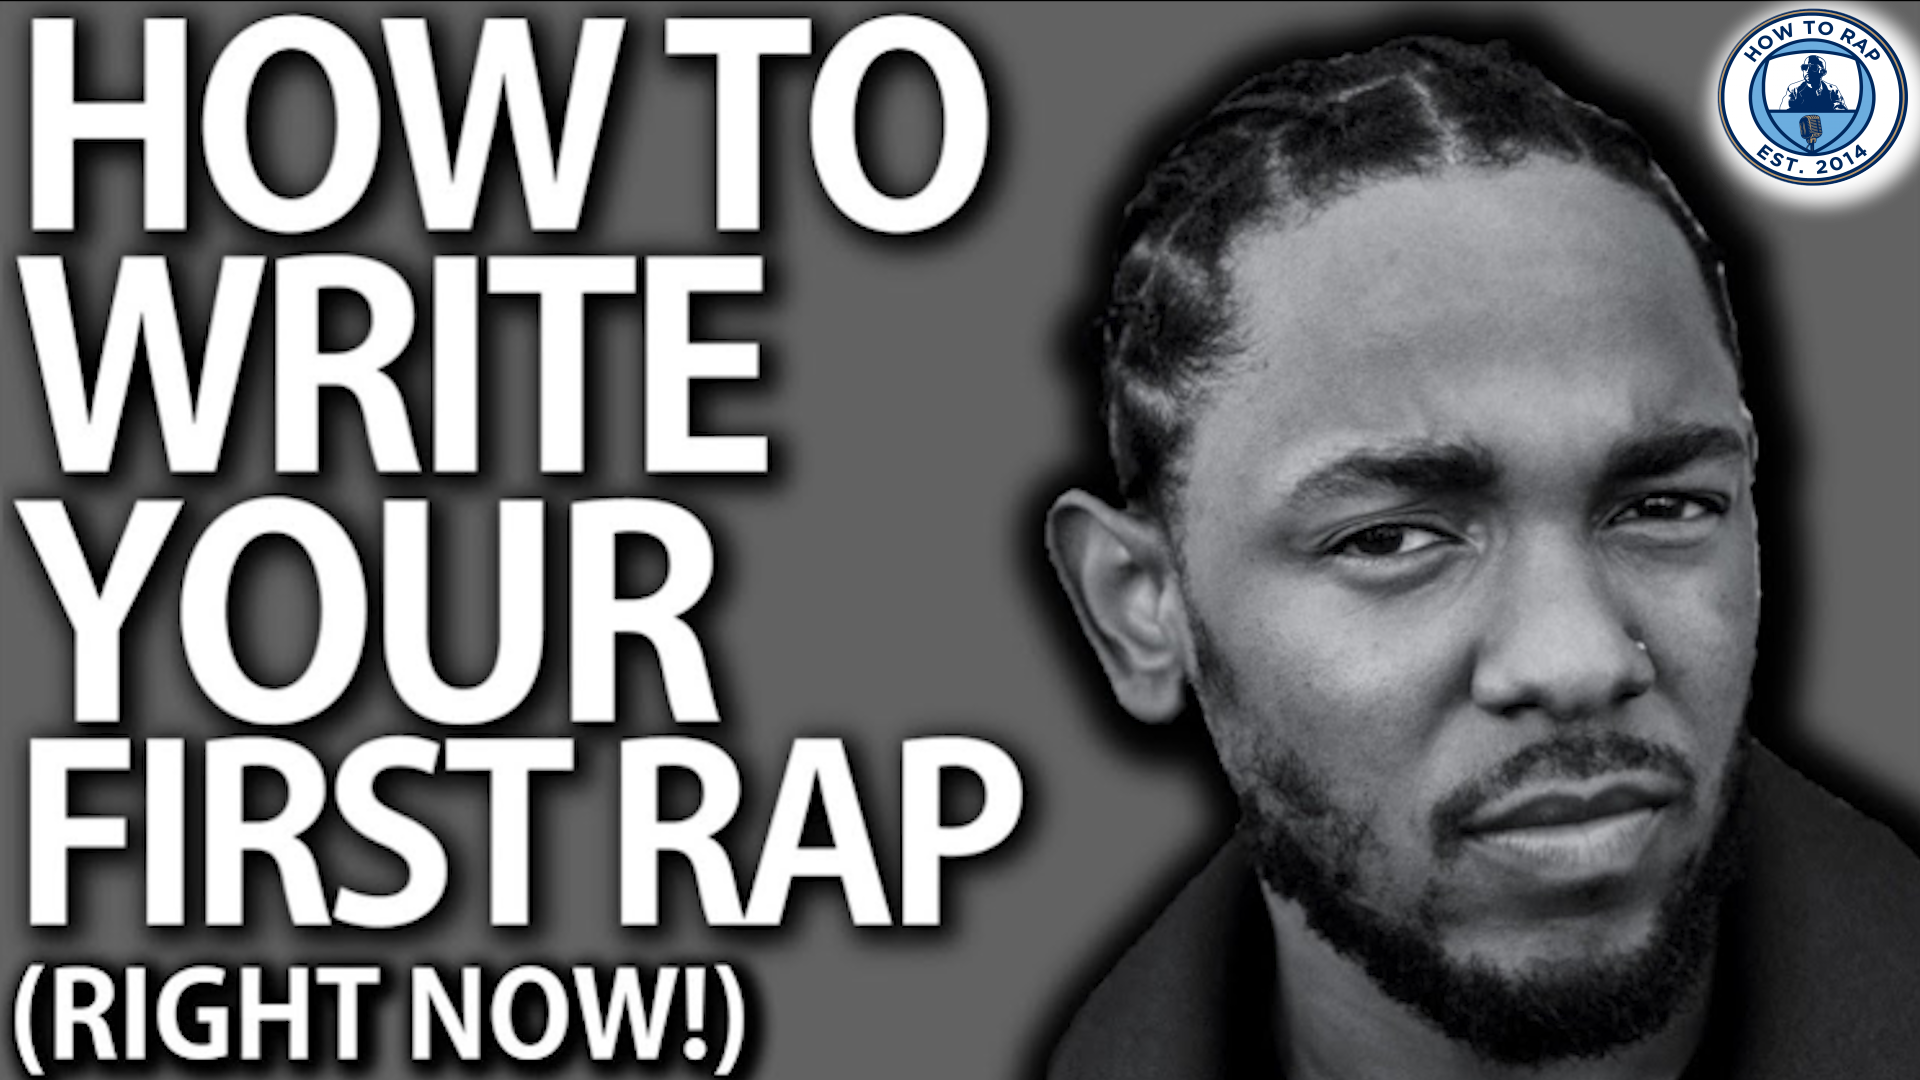 How To Write A Rap: Your First Verse In Under 11 Minutes (Step-By-Step)